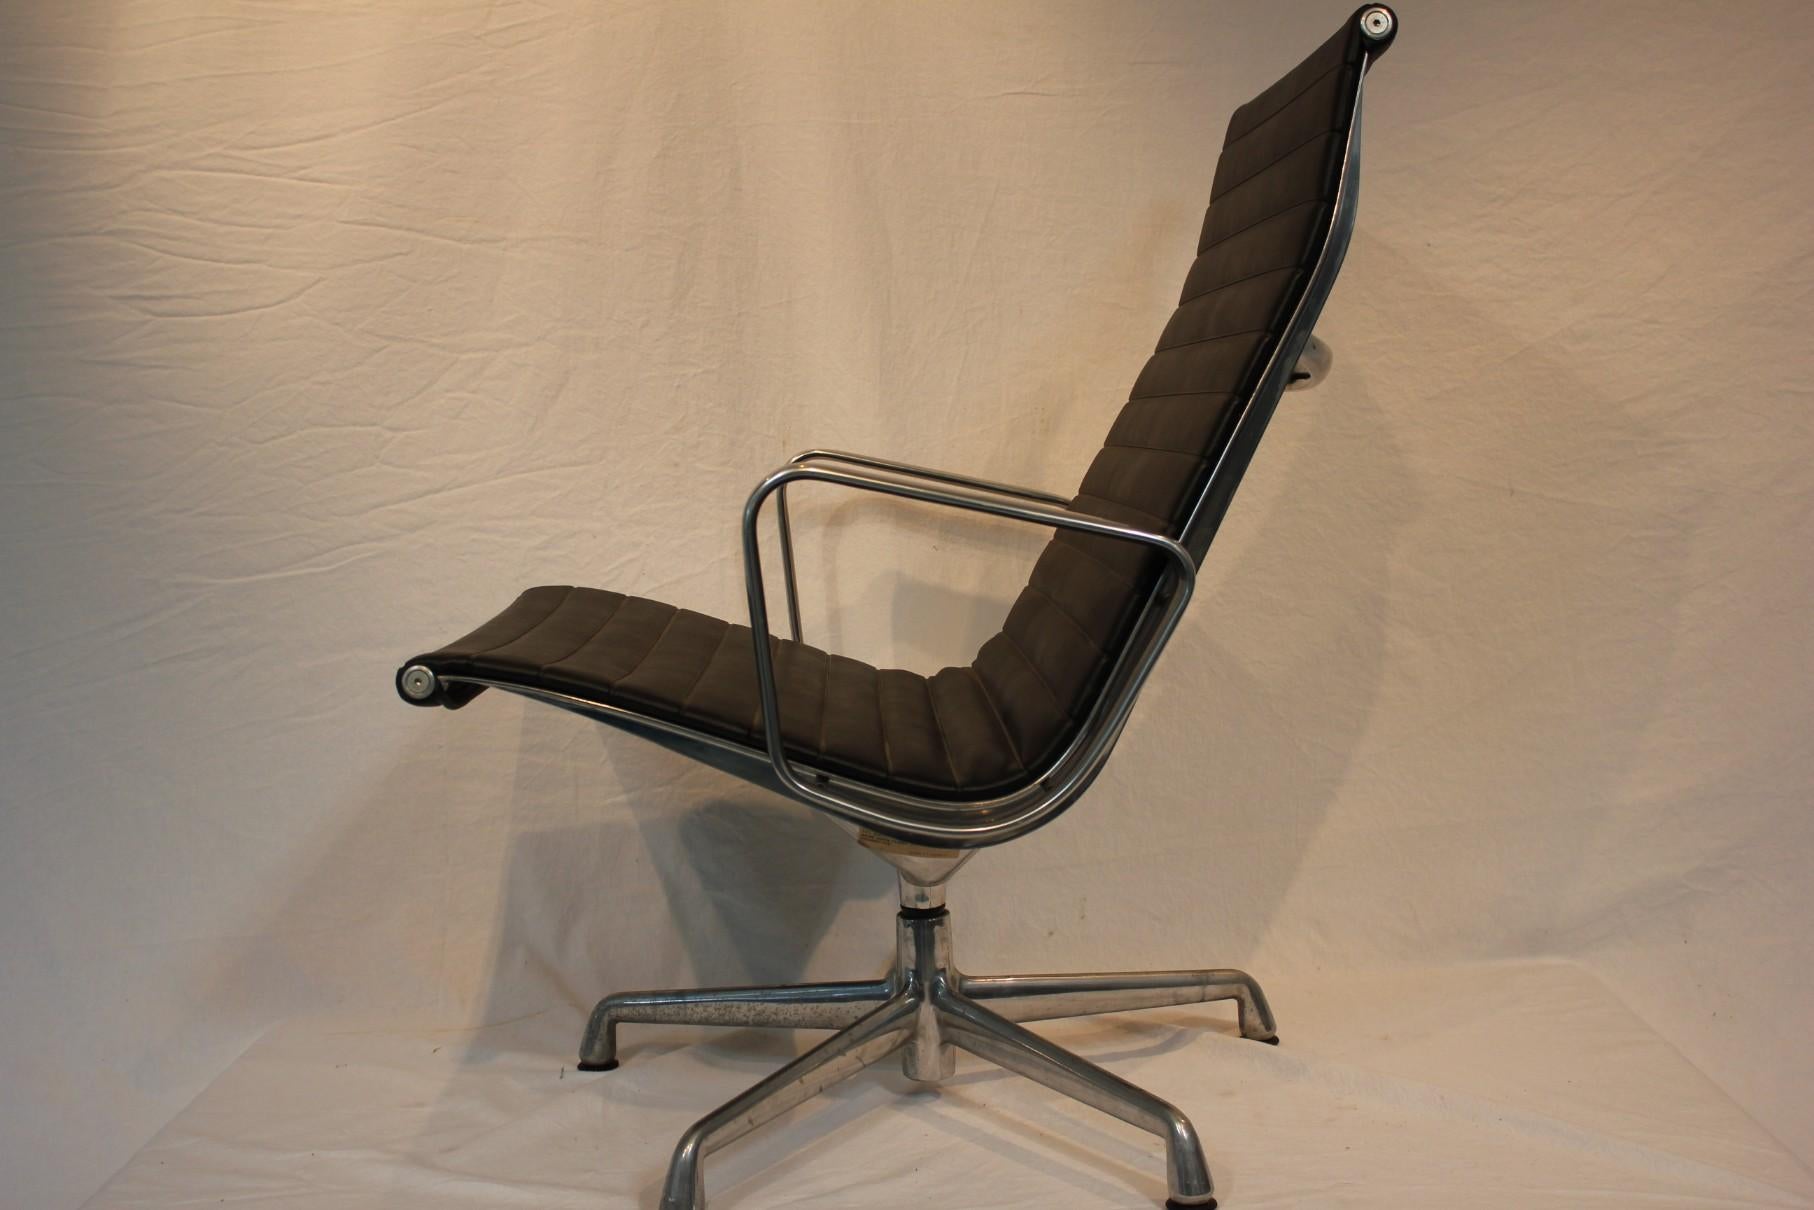 Hand-Crafted Herman Miller Eames Aluminum Lounge Chair Mid 20th Century Modern Circa 1970 For Sale